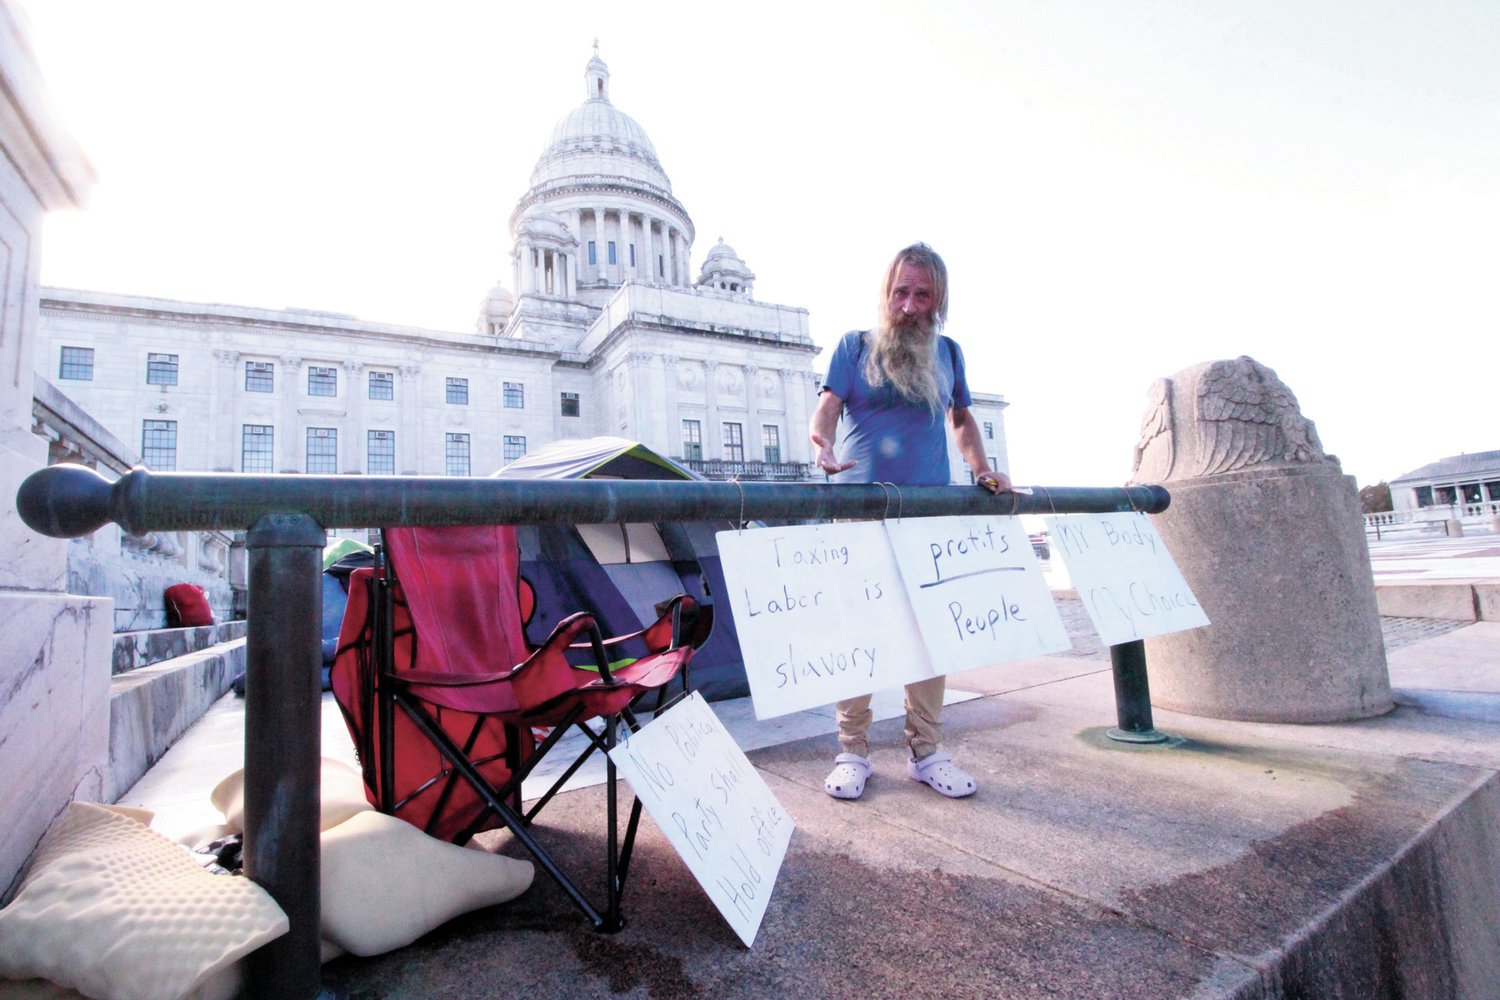 STATE HOUSE ENCAMPMENT: Michael Nugent one of the homeless who have pitched tents in front of the State House does not see pallet housing as a means of addressing the homeless population. (Herald photo)